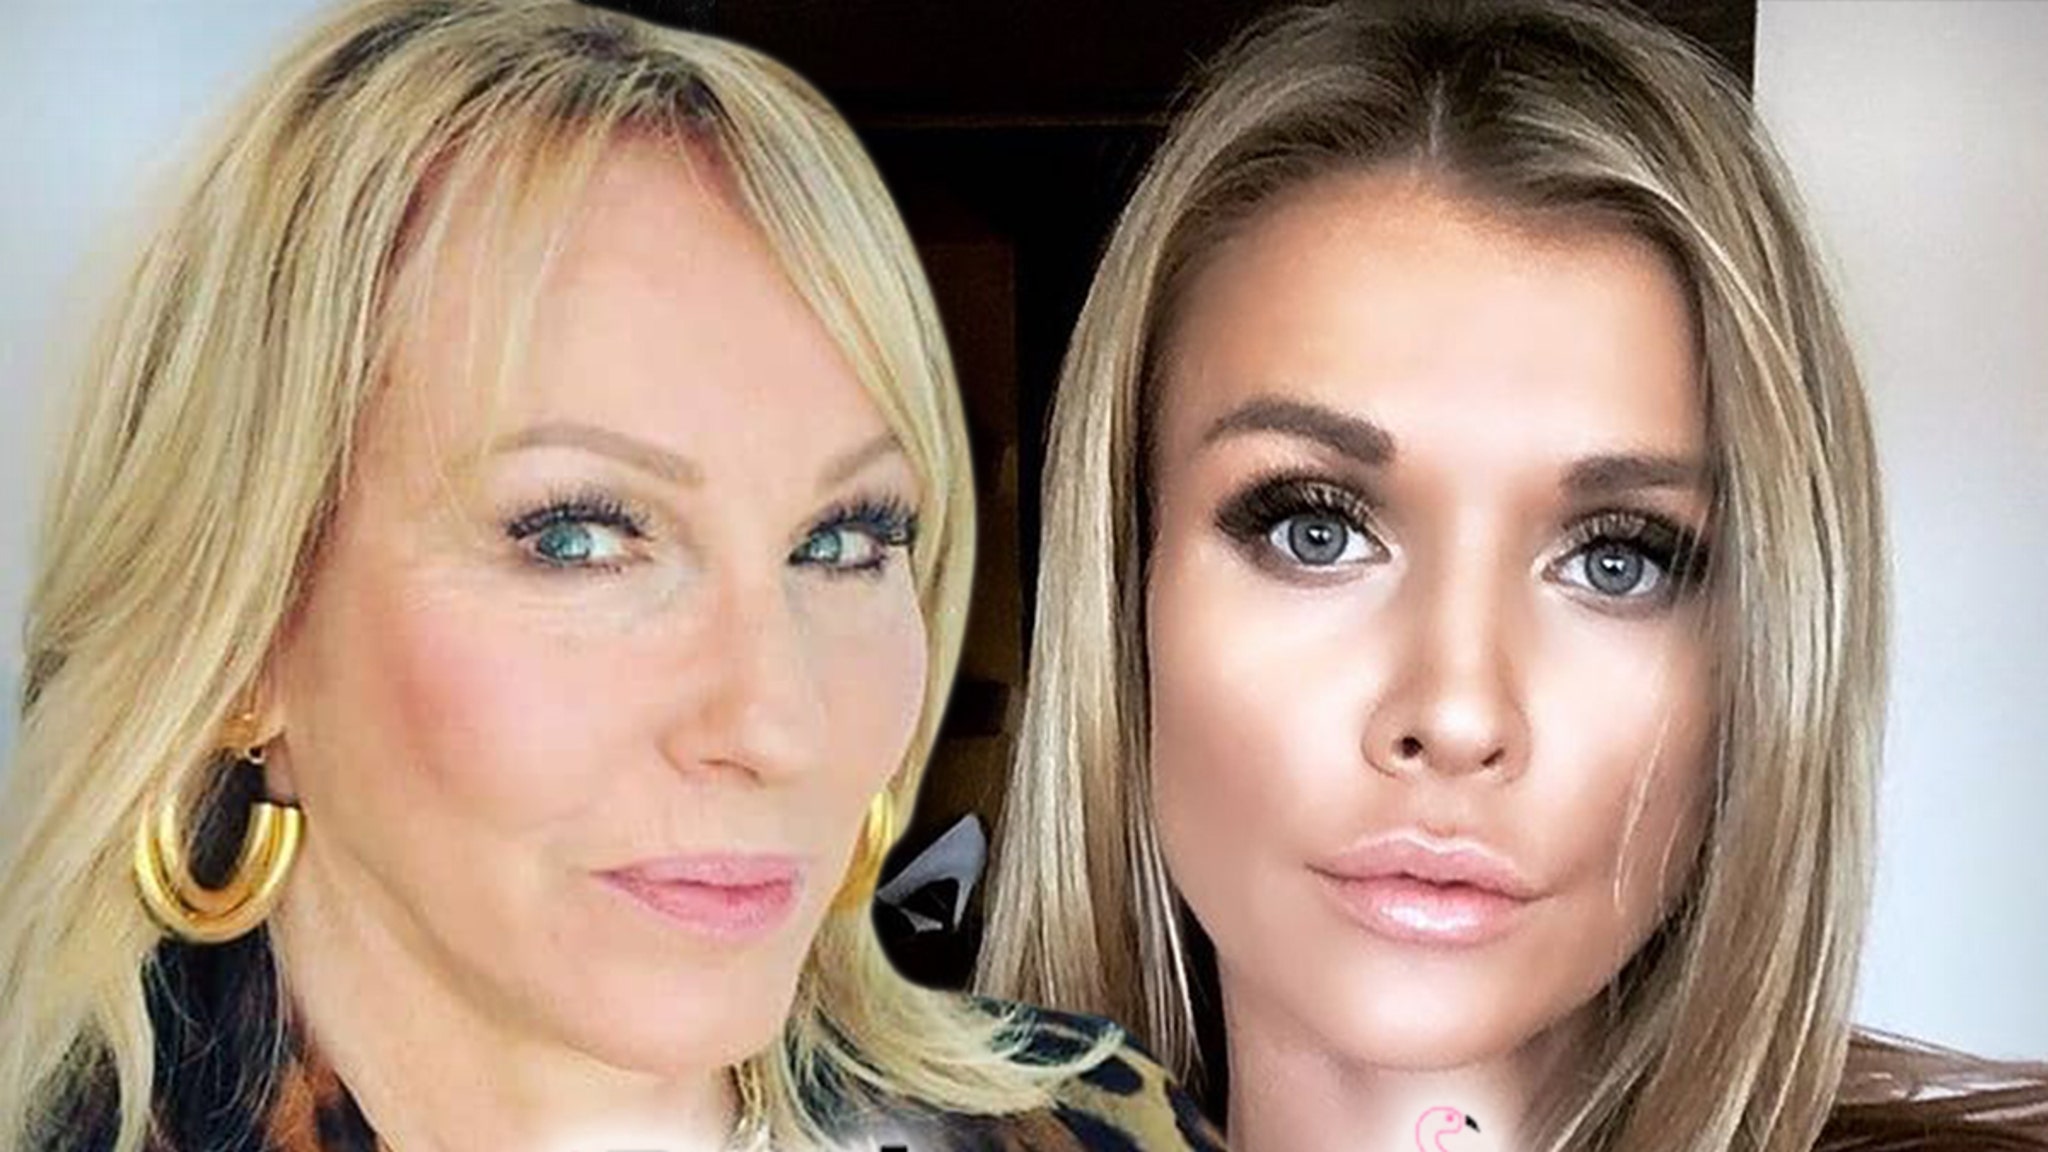 Restart of ‘Real Housewives of Miami’ will not include Lea Black or Joanna Krupa